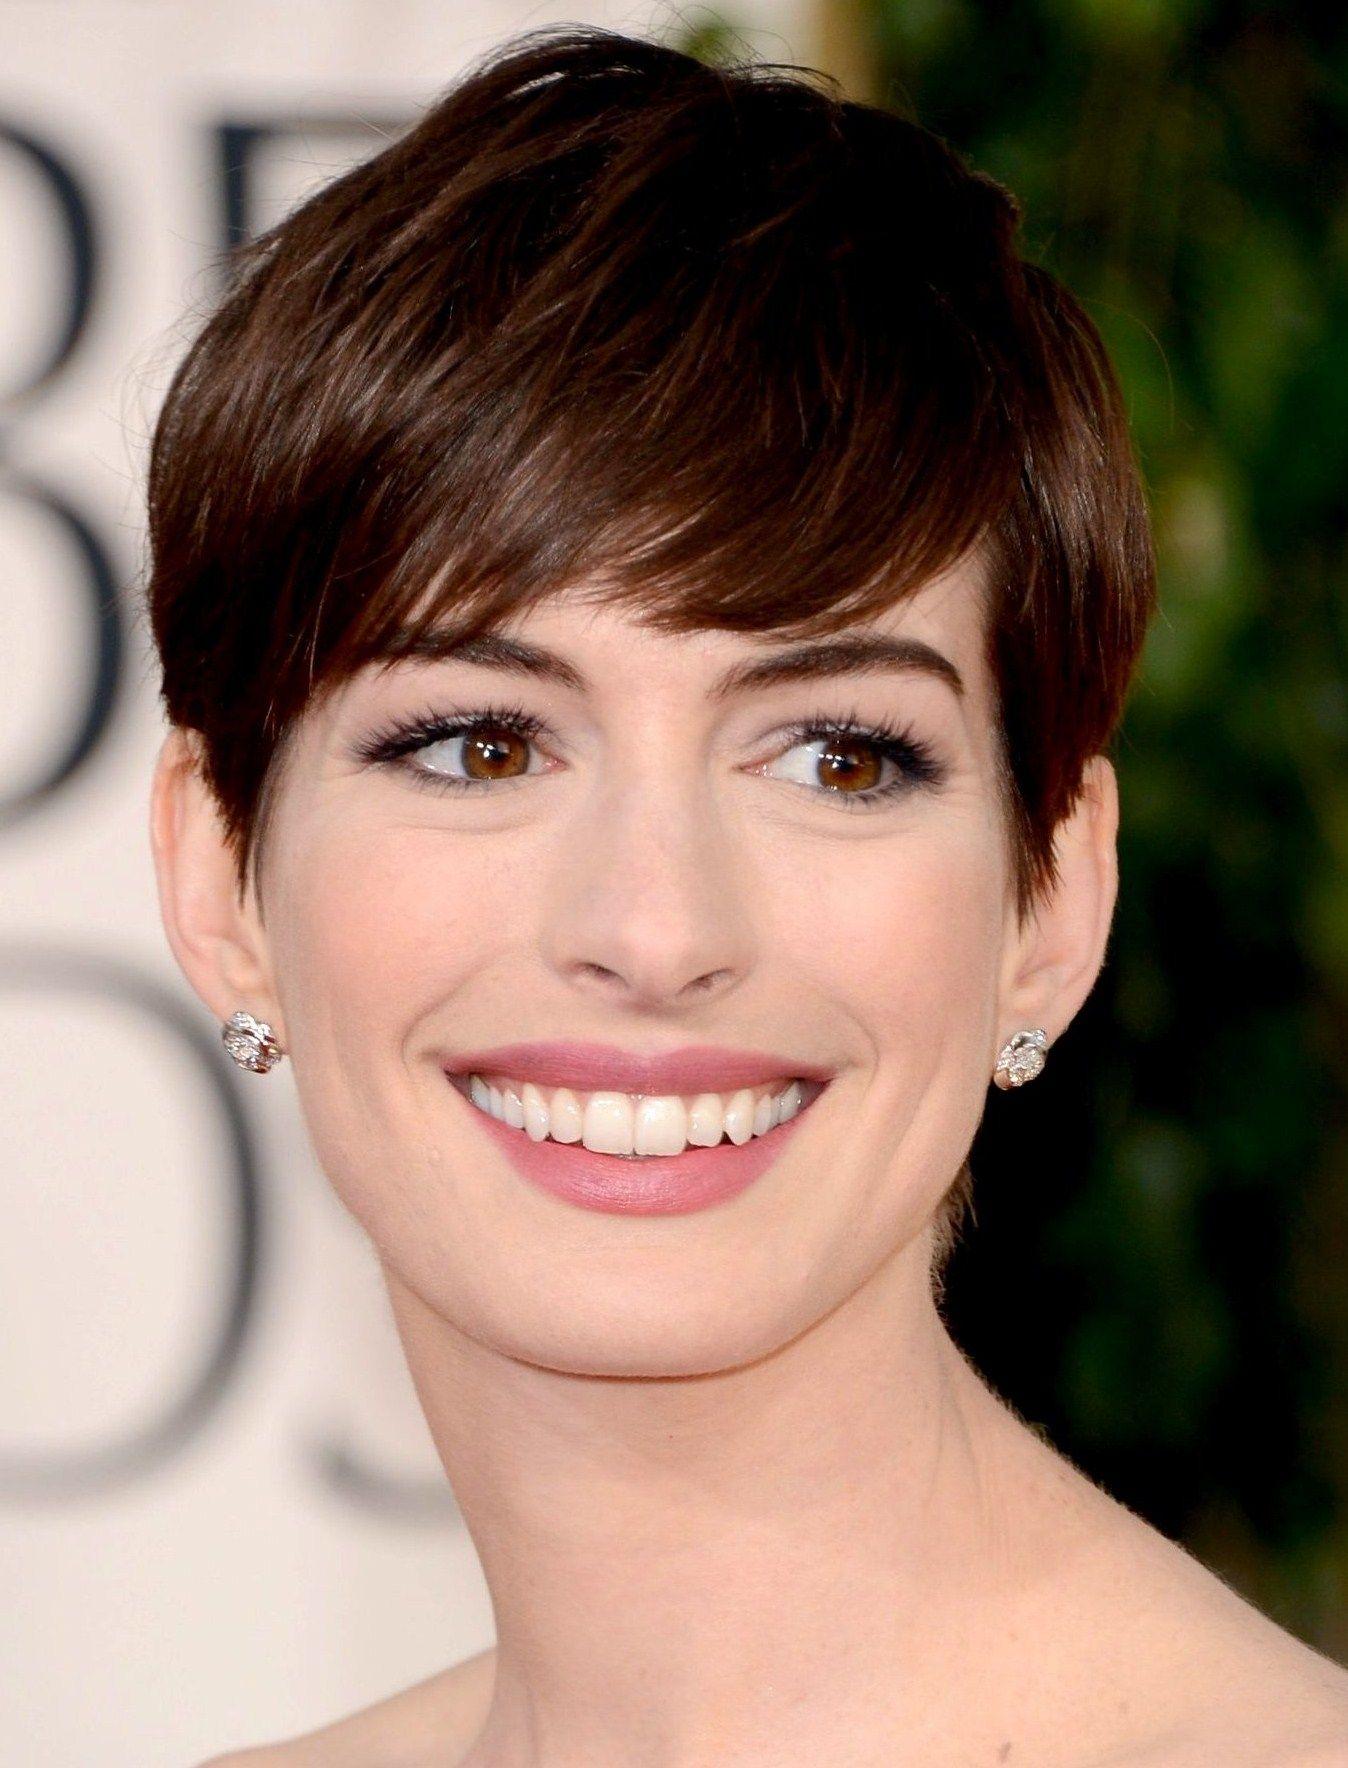 Anne Hathaway: roles in movies to 2001